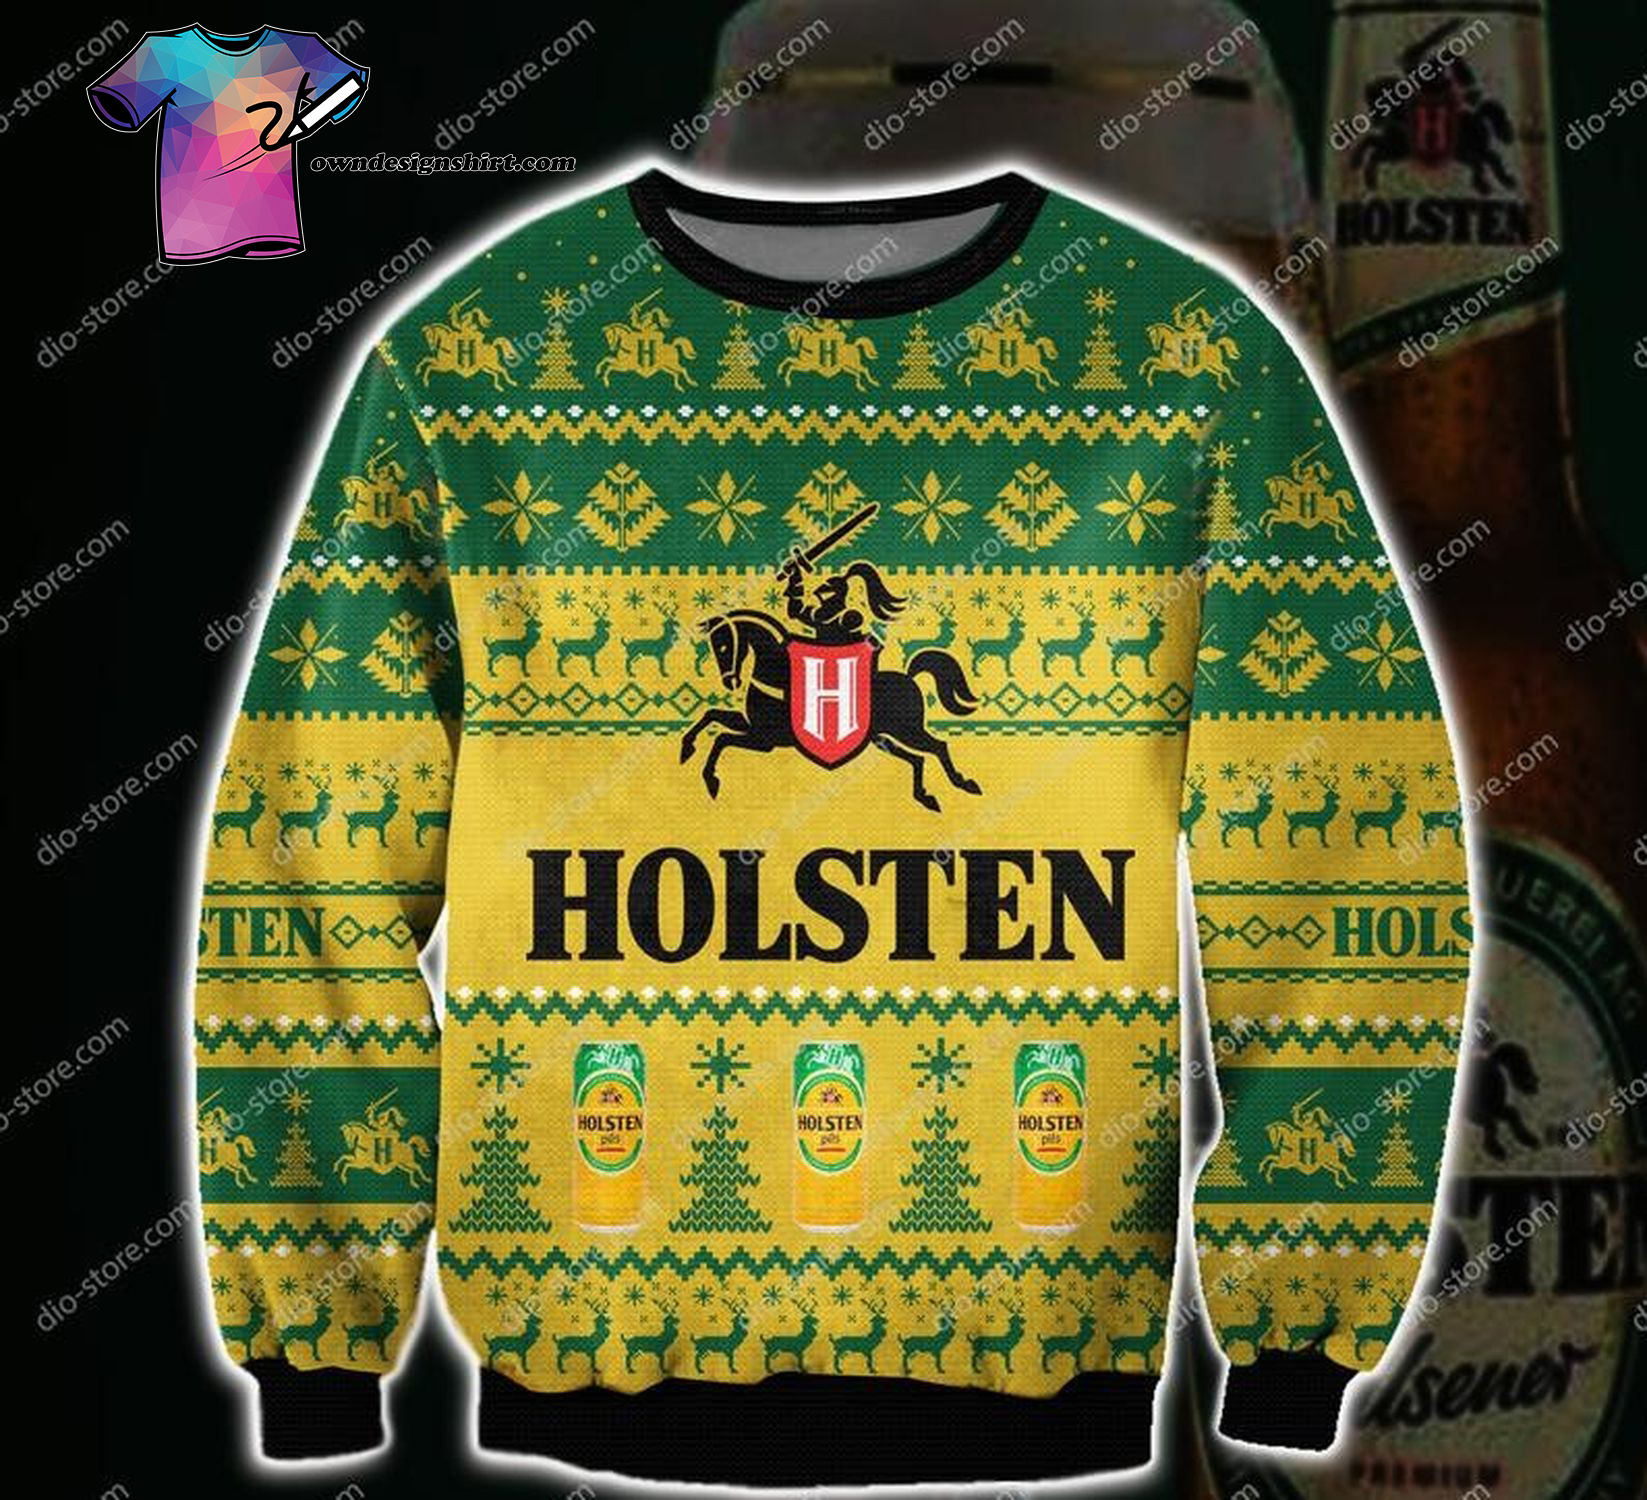 Holsten Pils All Over Printed Ugly Christmas Sweater